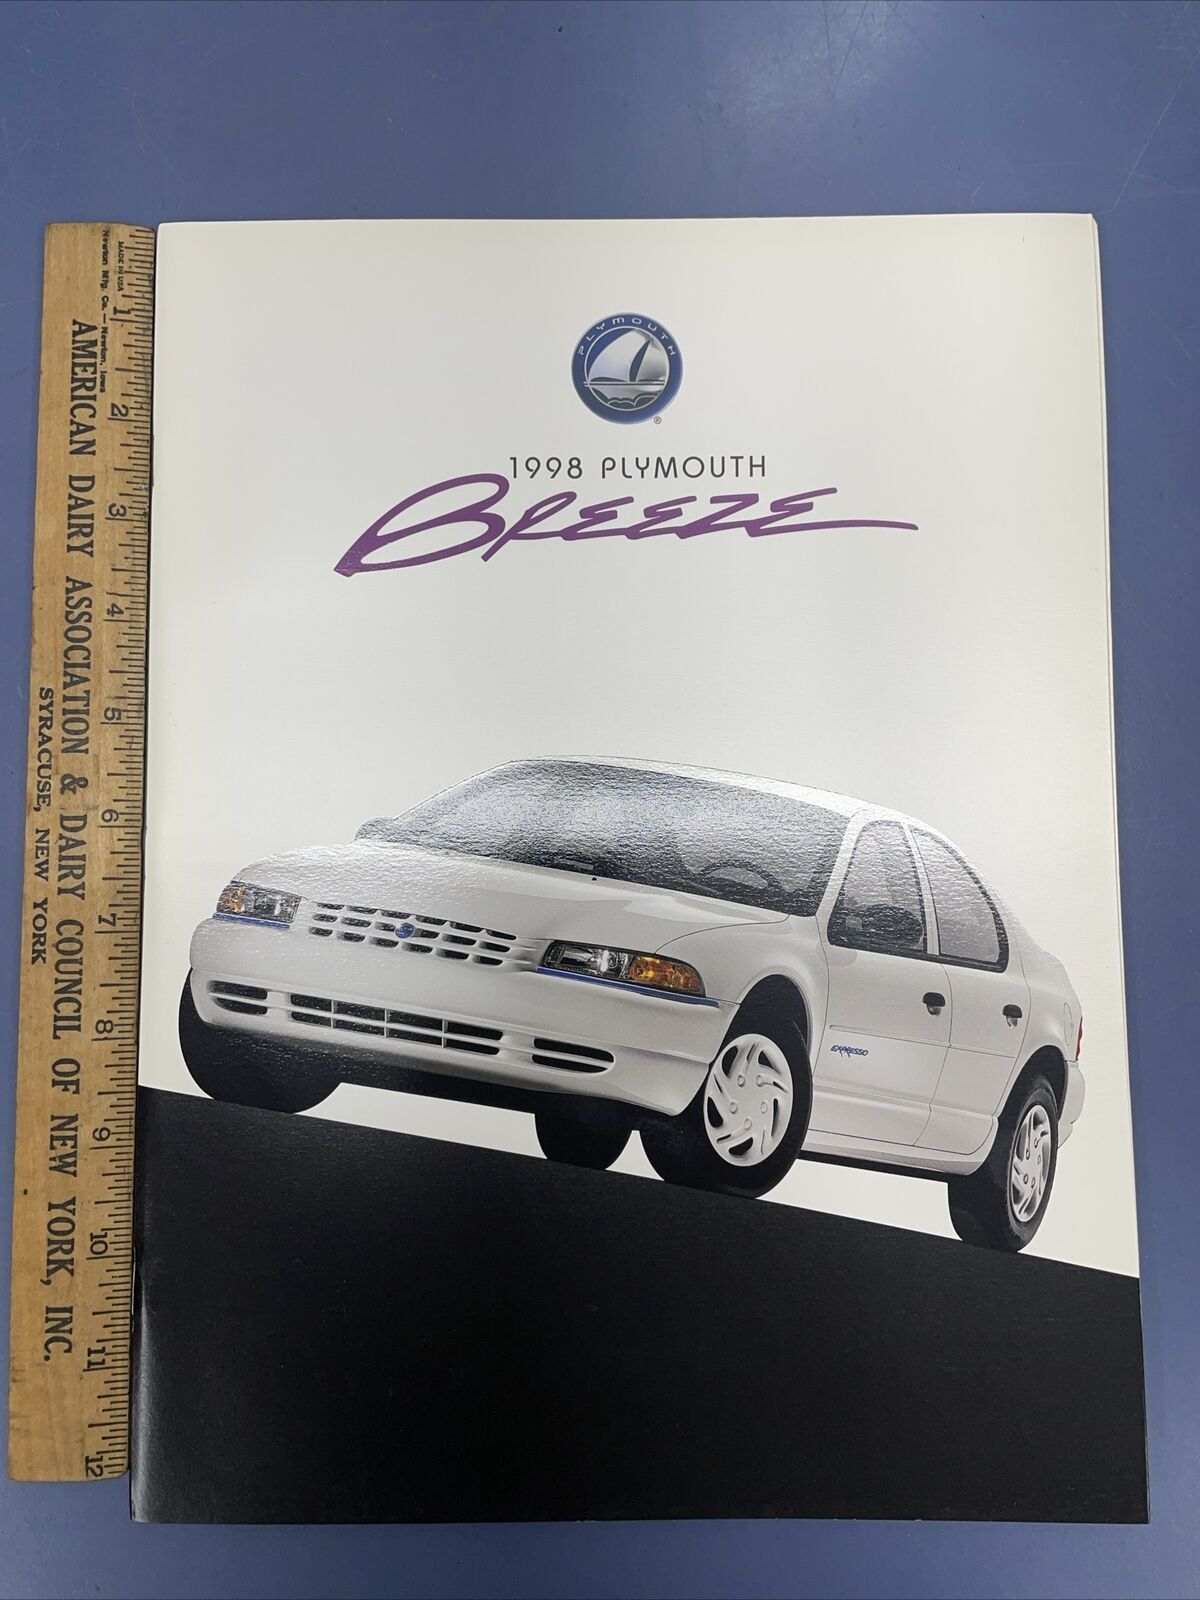 Vintage 1998 NOS Plymouth Breeze Deluxe Dealership Brochure 26 Pages Prowler Pic